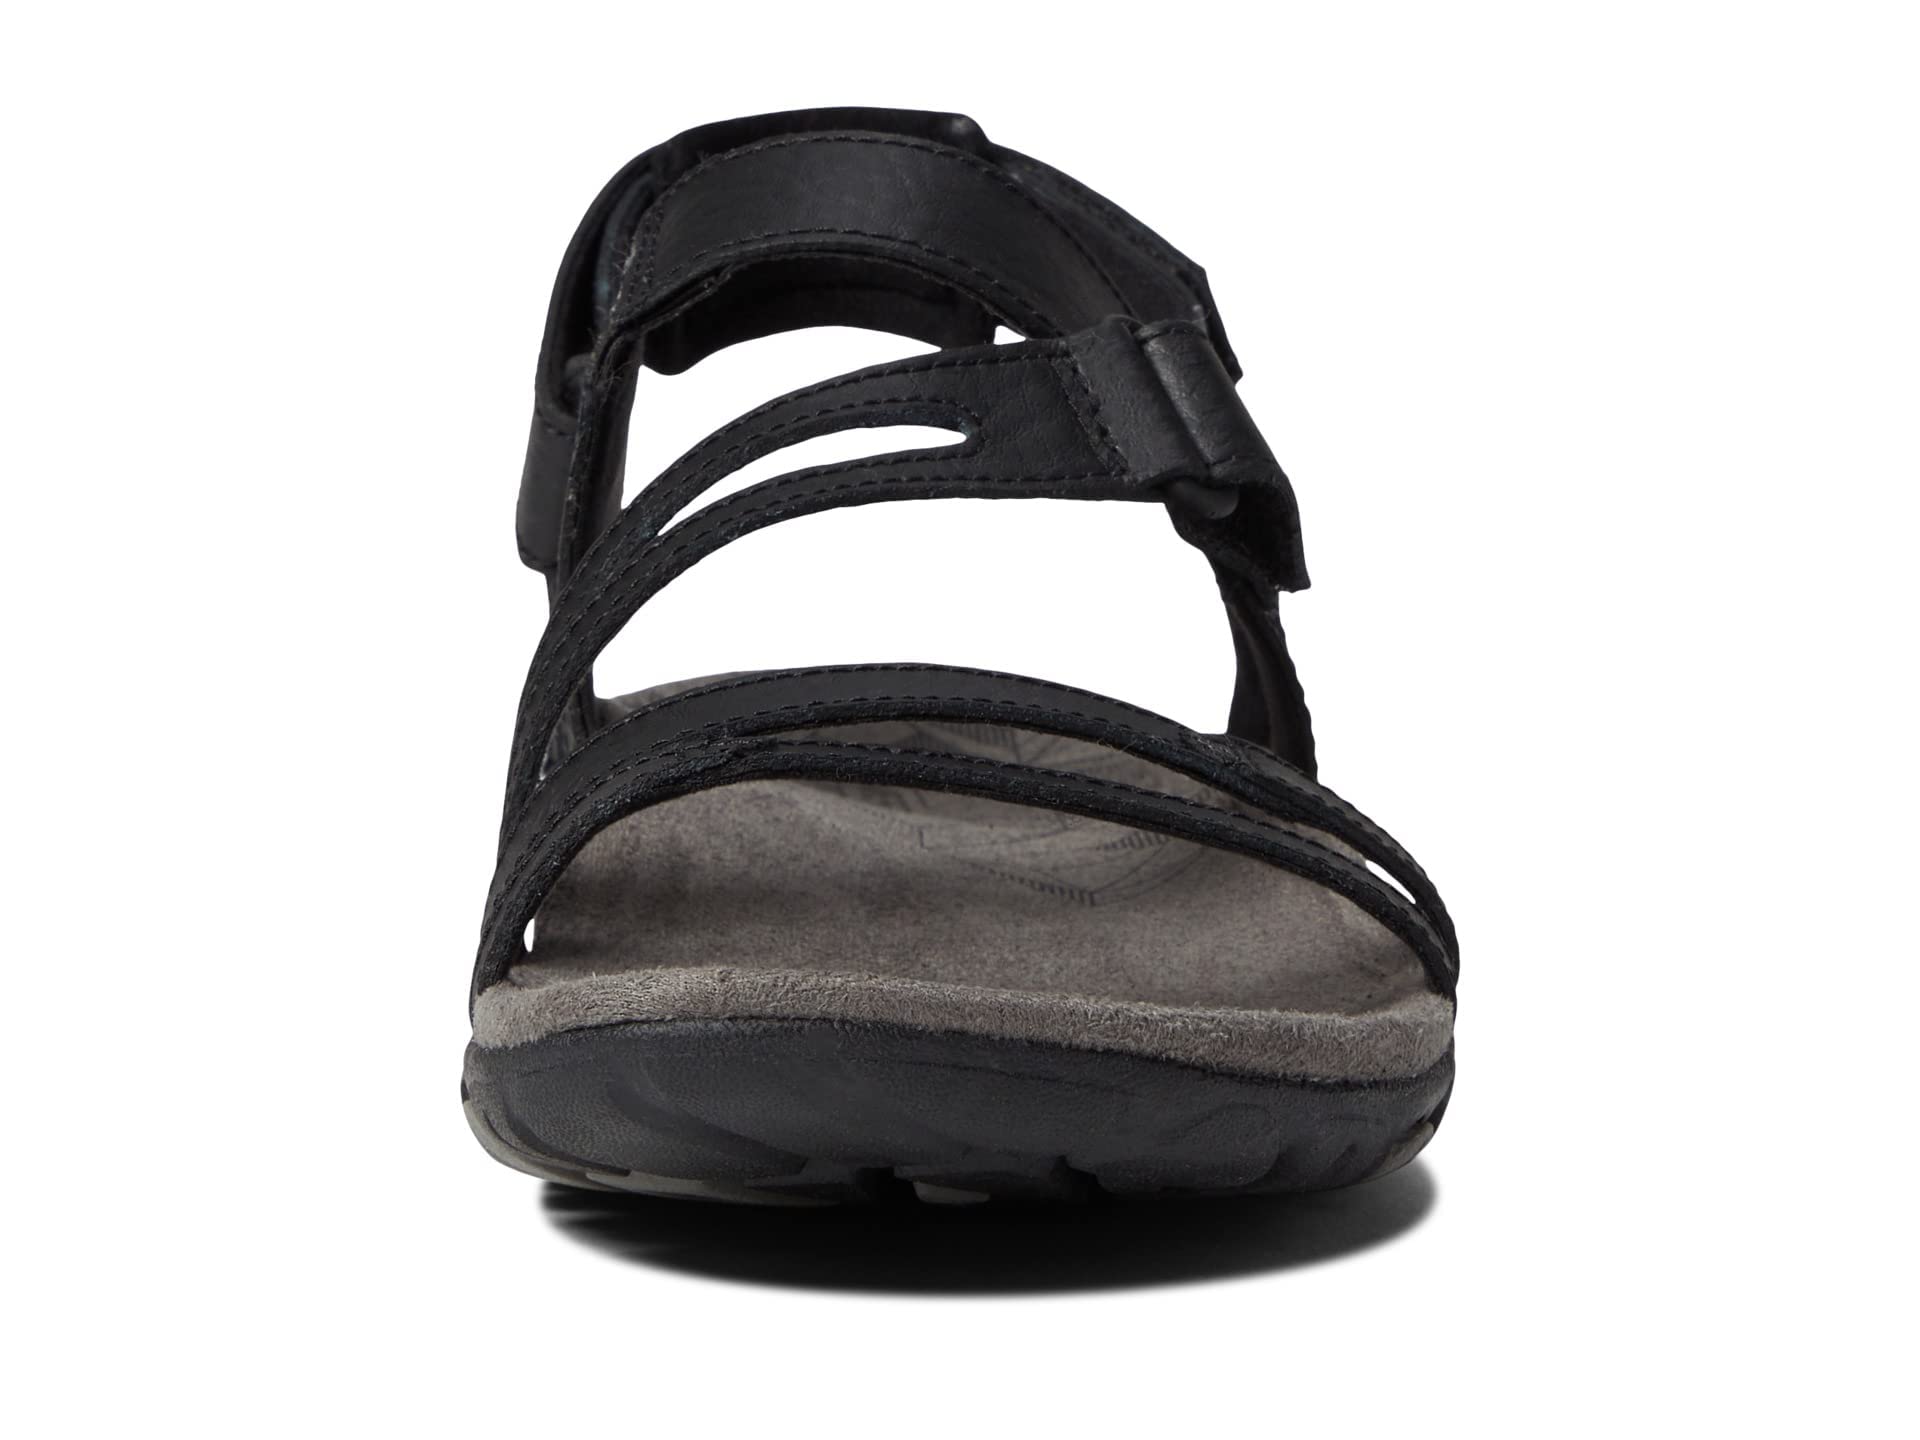 Merrell Sandspur Rose Convert Sandals for Women - Textile Lining with Slingback Design, Hook-Loop Closure, and Rubber OutsoleBlack 8 M